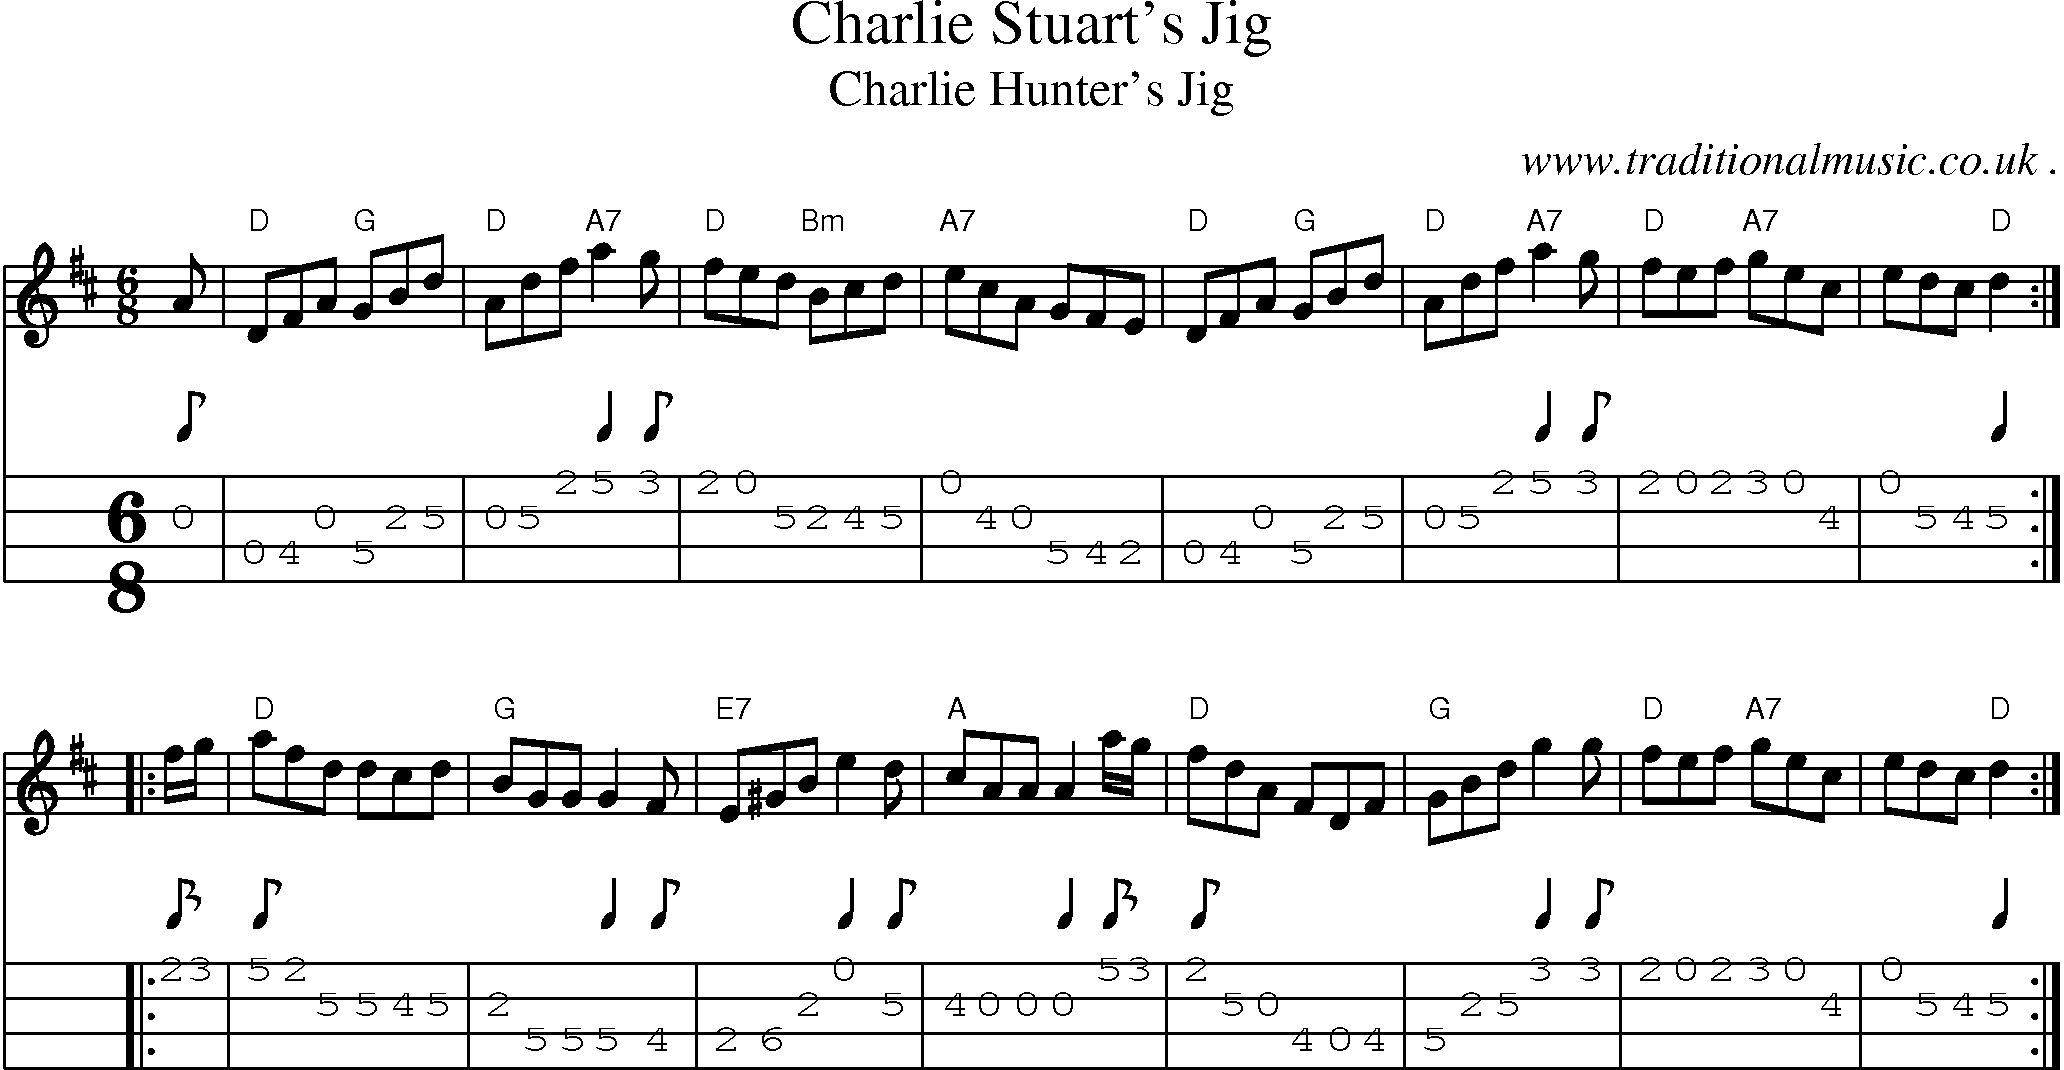 Sheet-music  score, Chords and Mandolin Tabs for Charlie Stuarts Jig